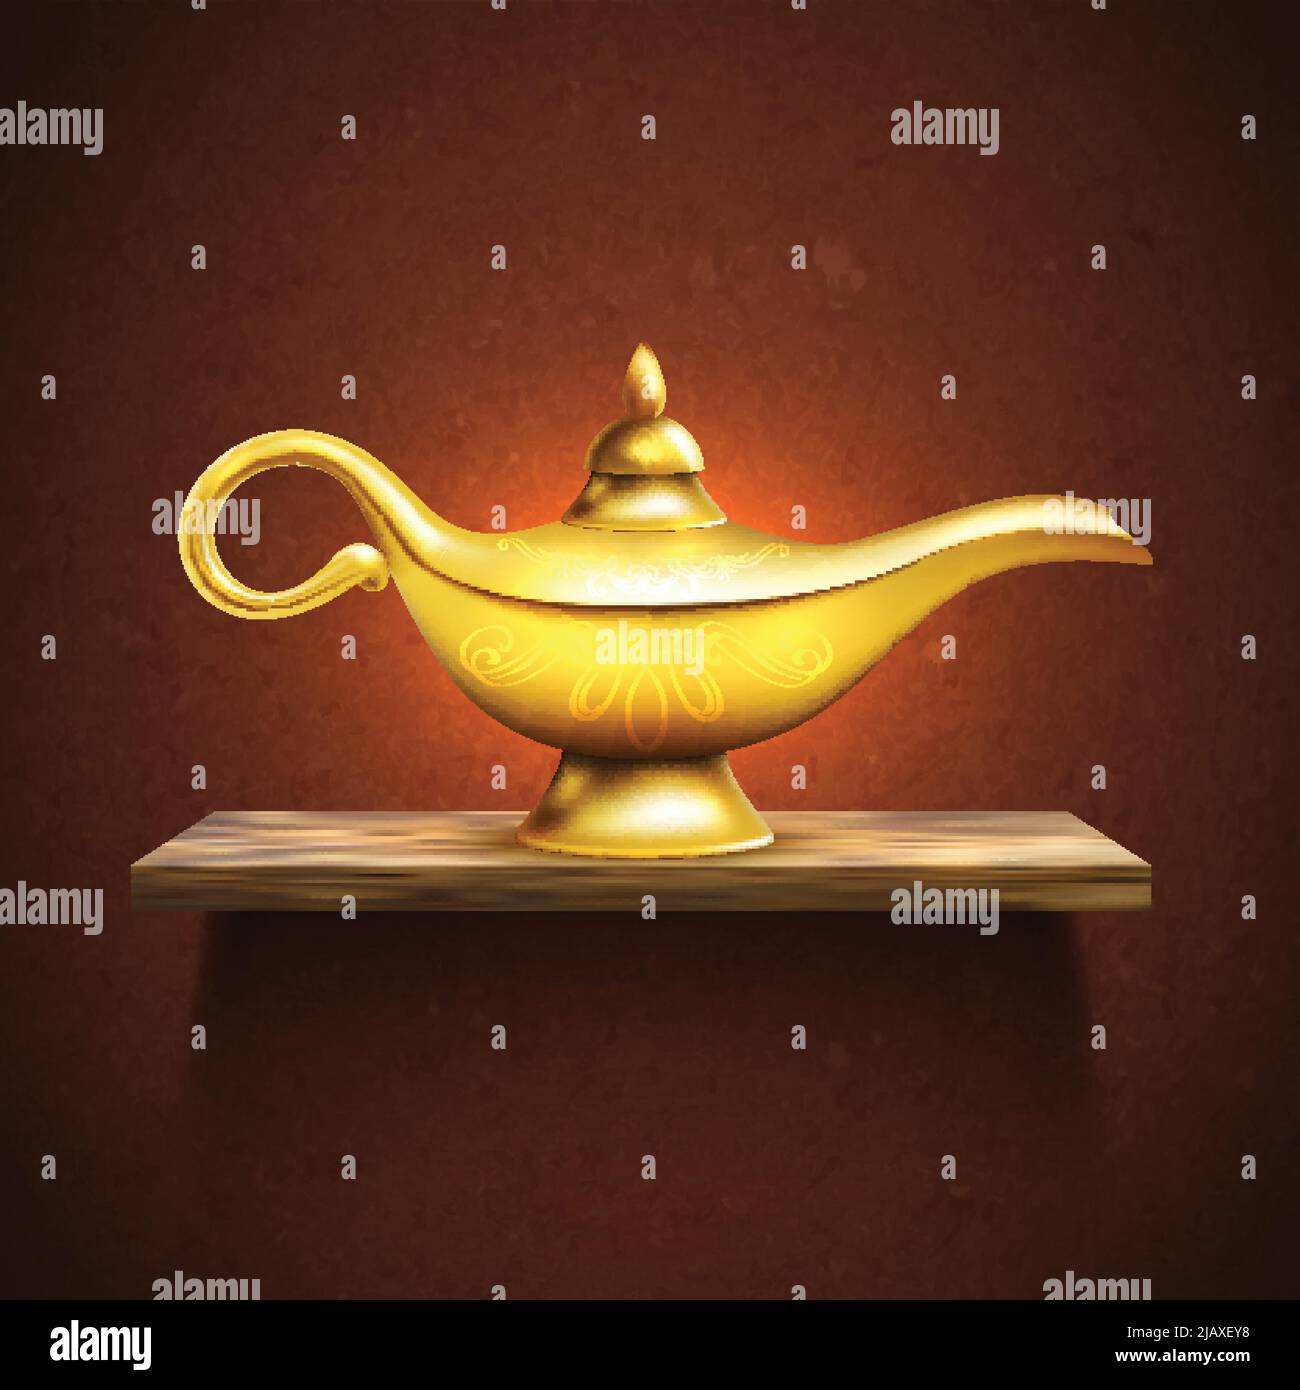 Realistic Aladdin golden lamp on wooden shelf colored poster with magical glow vector illustration Stock Vector